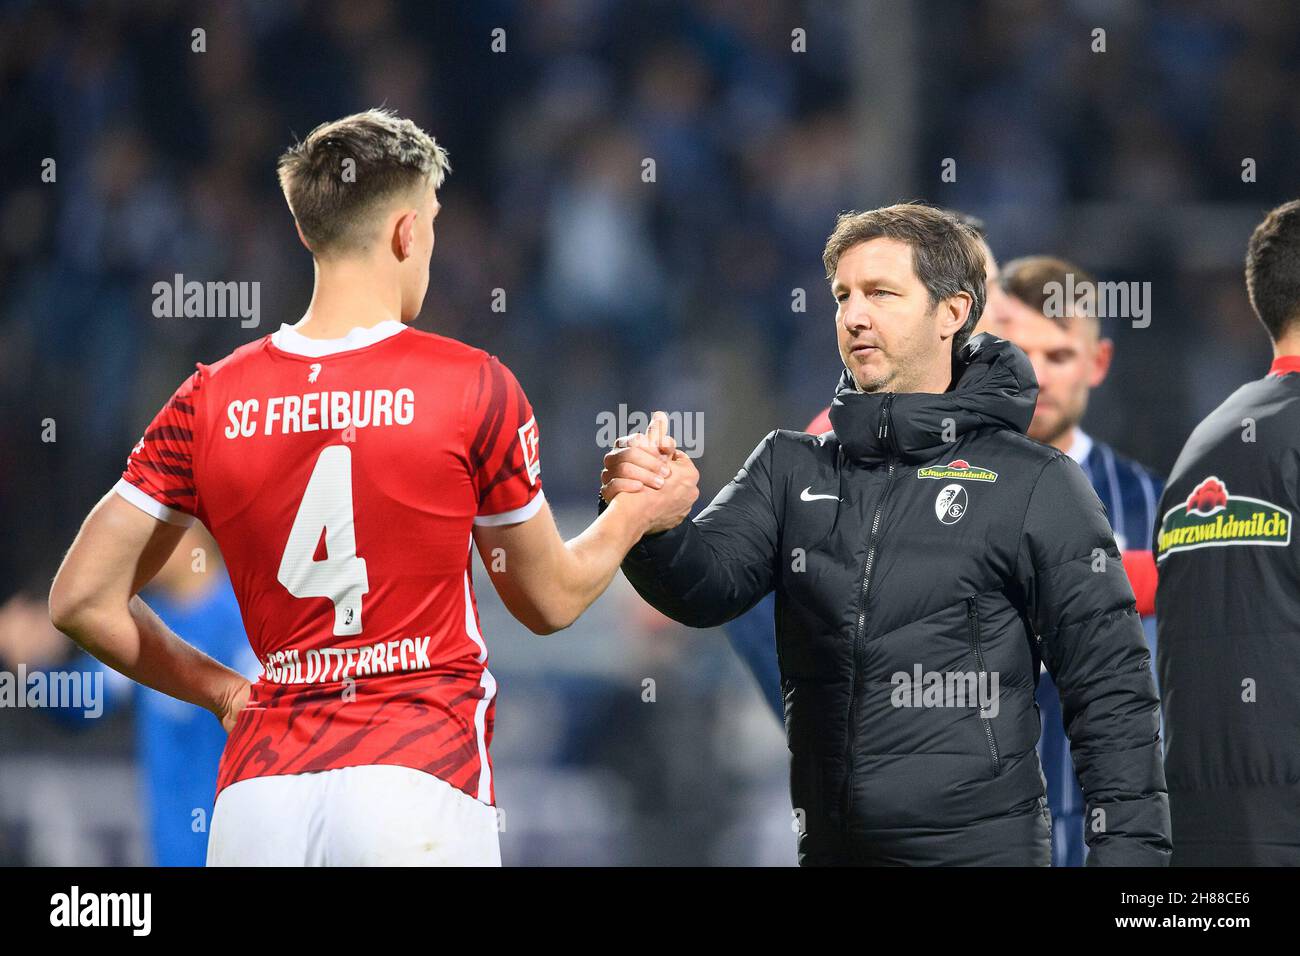 Jochen SAIER r. (FR, Management Sport) claps Nico SCHLOTTERBECK (FR) after the game. Soccer 1st Bundesliga, 13th matchday, VfL Bochum (BO) - SC Freiburg (FR) 2: 1, on November 27, 2021 in Bochum/Germany. #DFL regulations prohibit any use of photographs as image sequences and/or quasi-video # Â Stock Photo